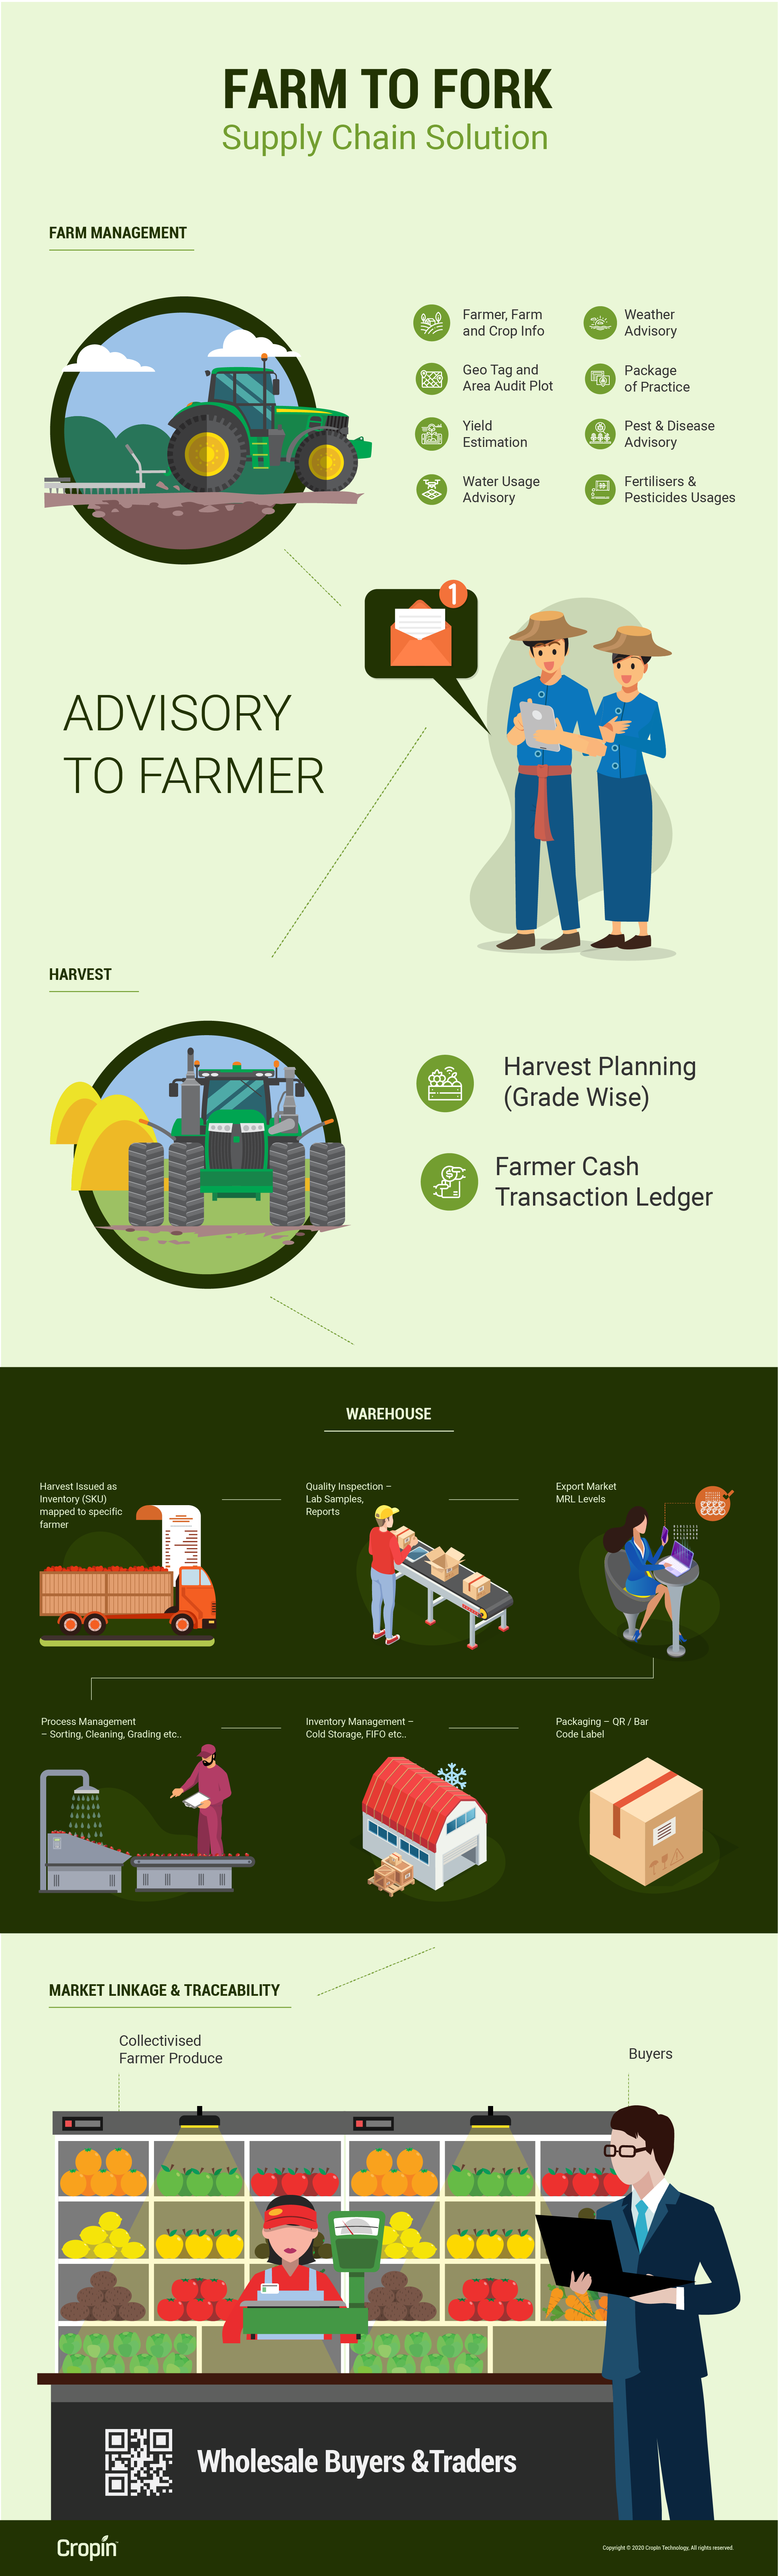 farm to fork supply chain solution detailed infographic